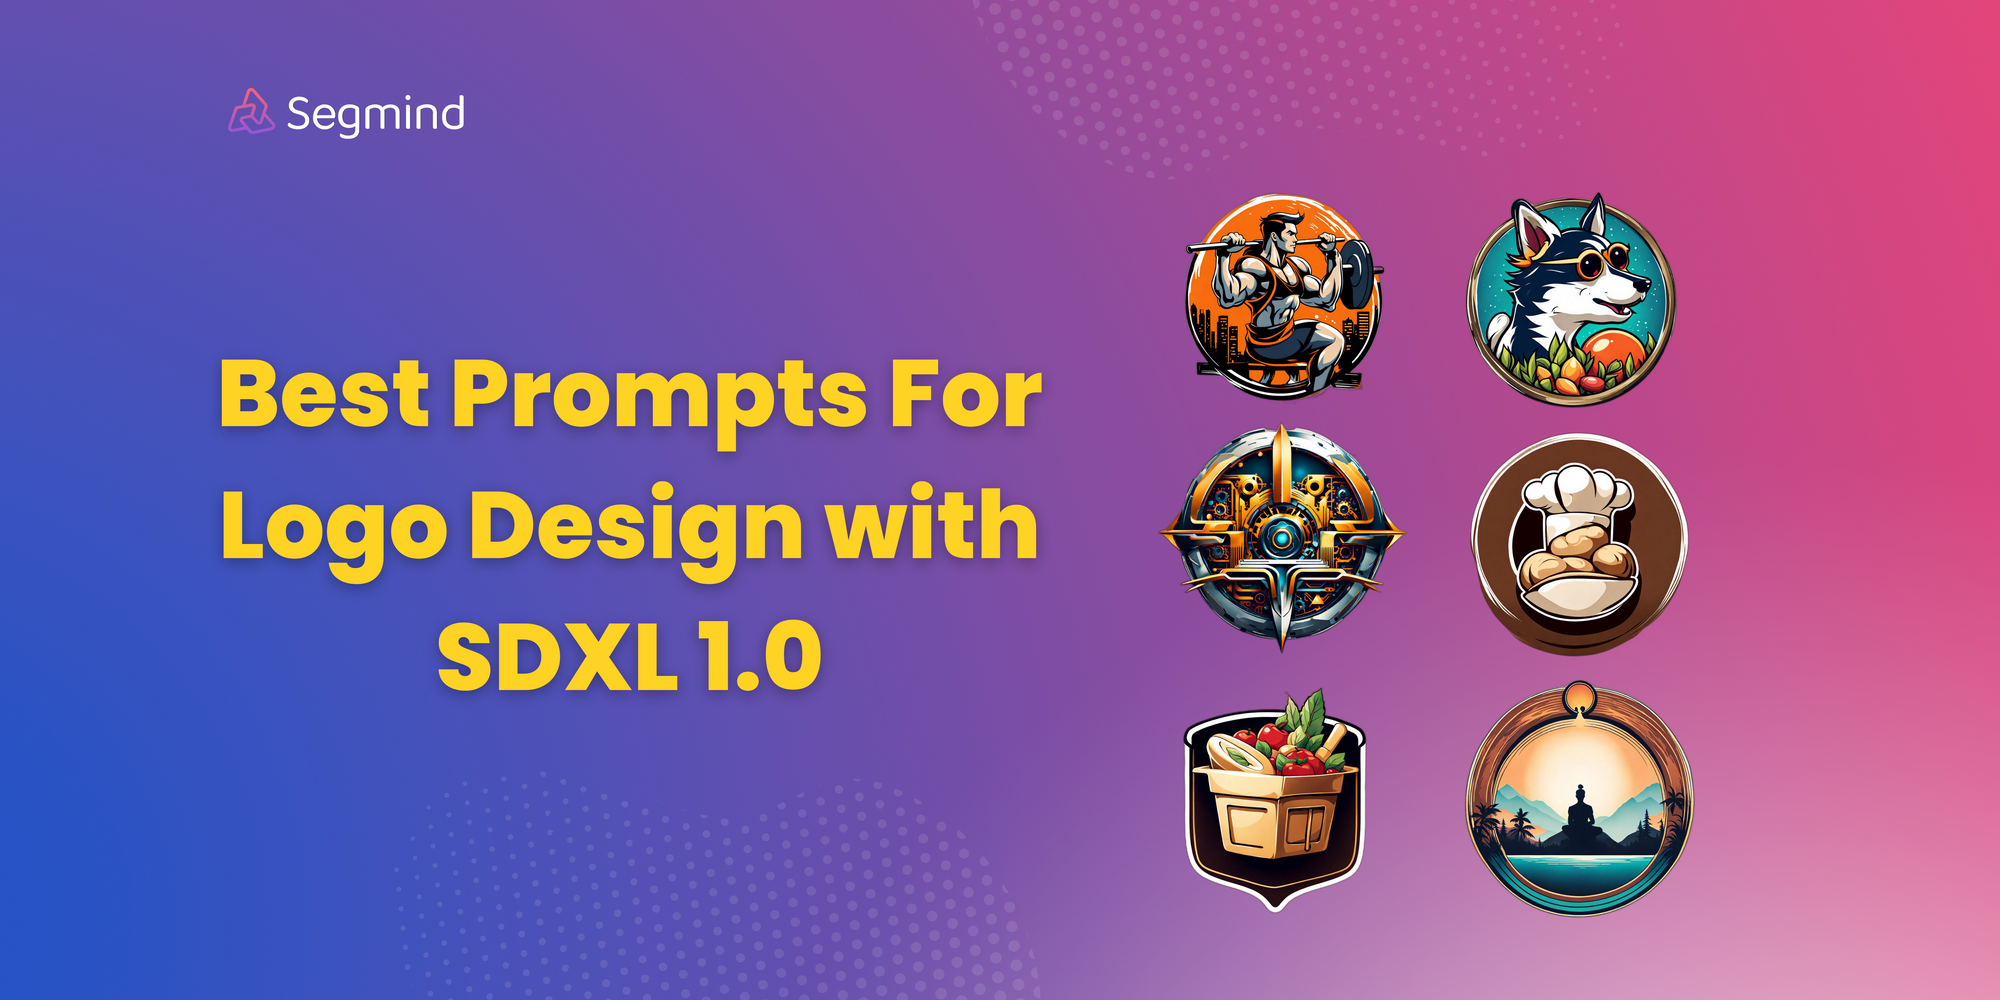 Best Prompts For Logo Design with SDXL1.0